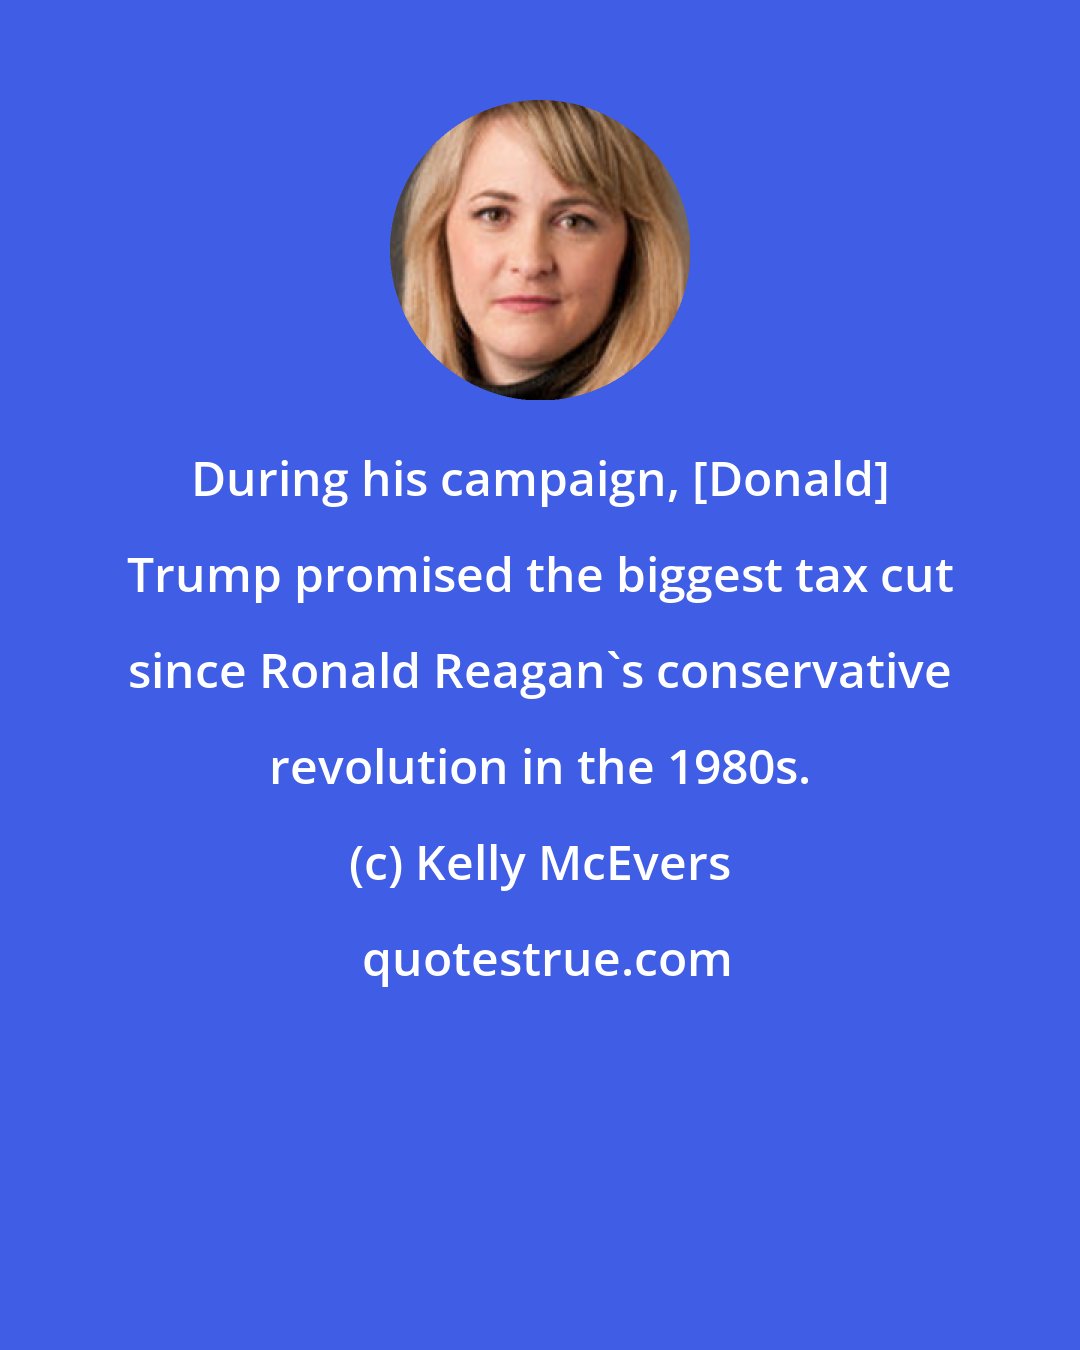 Kelly McEvers: During his campaign, [Donald] Trump promised the biggest tax cut since Ronald Reagan's conservative revolution in the 1980s.